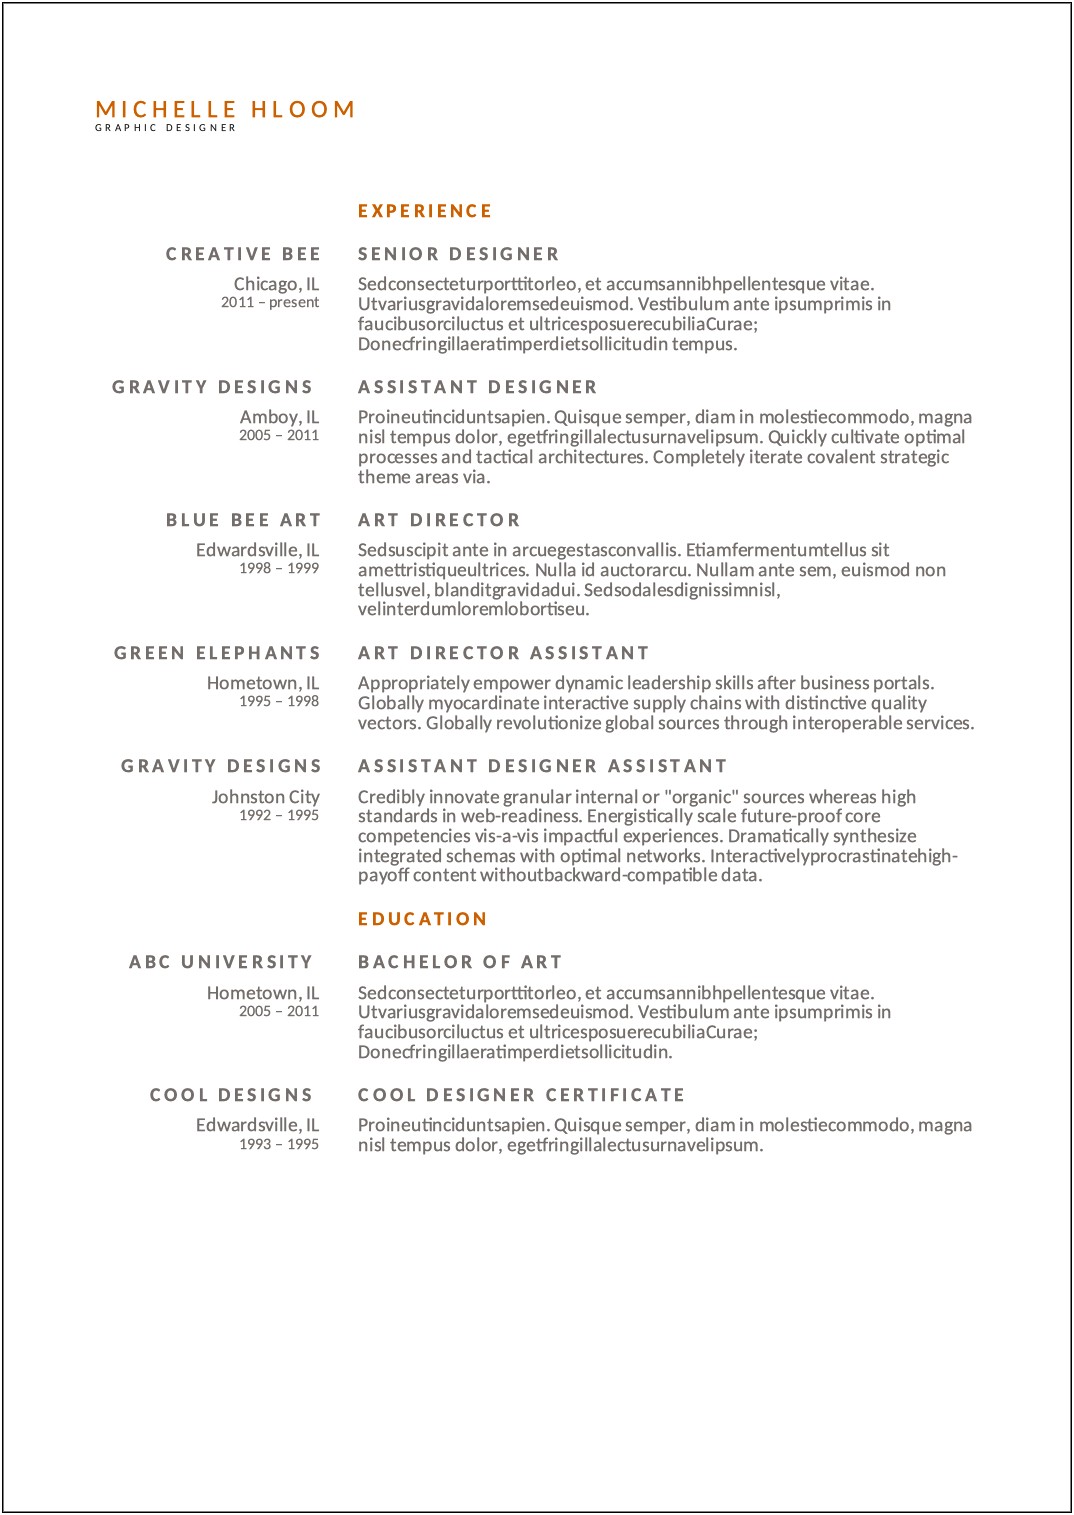 Attractive Resume Templates Free Download For Libreoffice